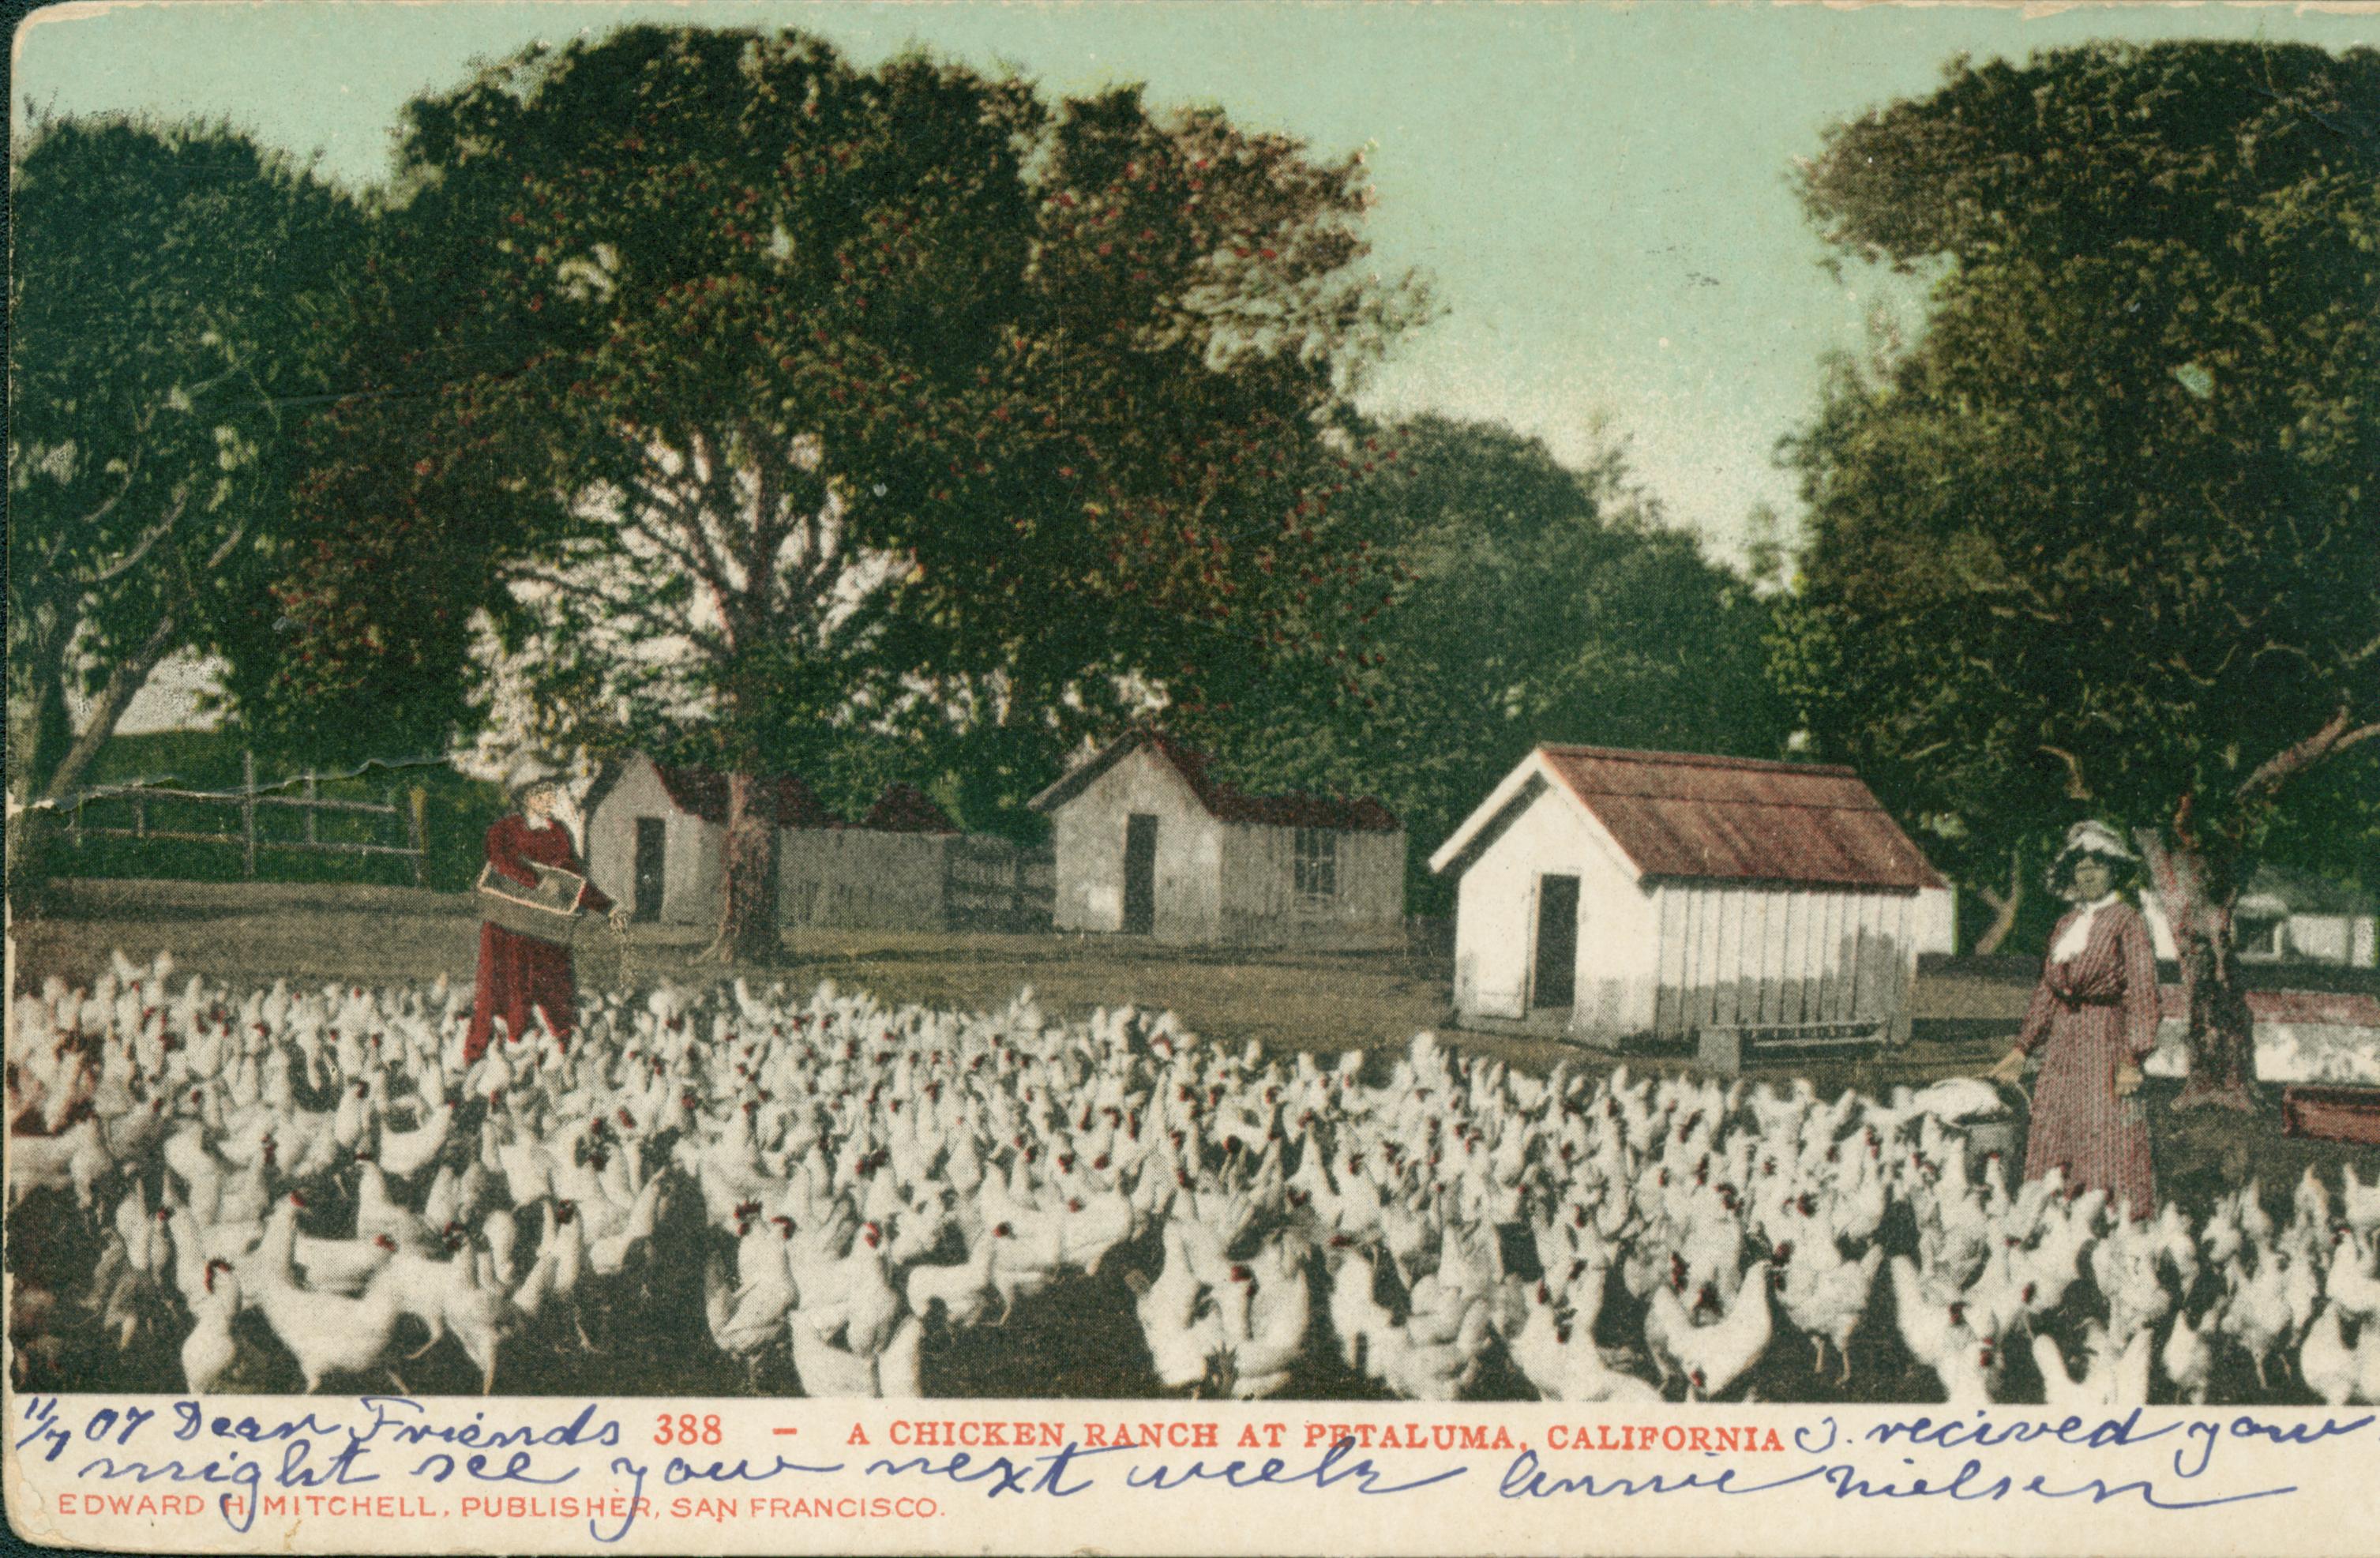 Shows a flock of chickens with two women tending them and several buildings in the background